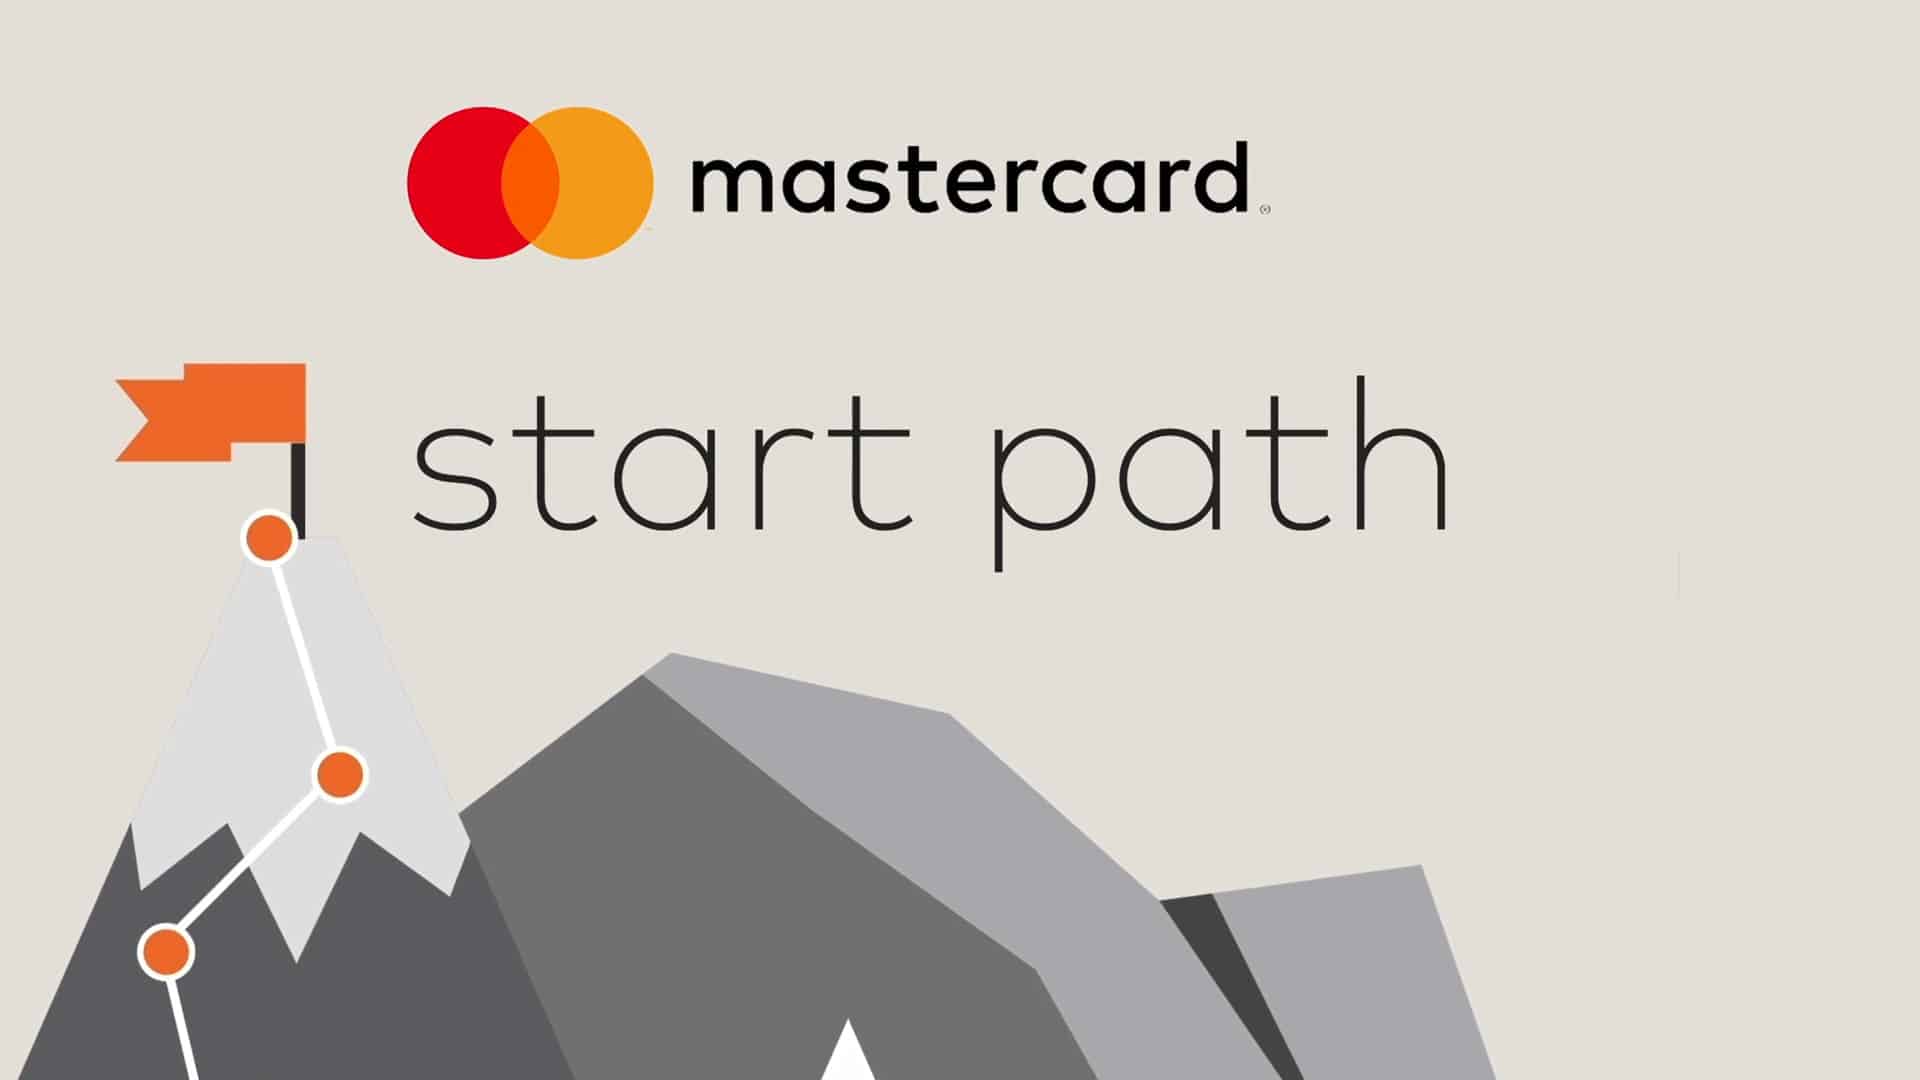 Five Startups Are Invited to Develop Use Cases for Blockchain Technology as Part of Mastercard’s Start Path